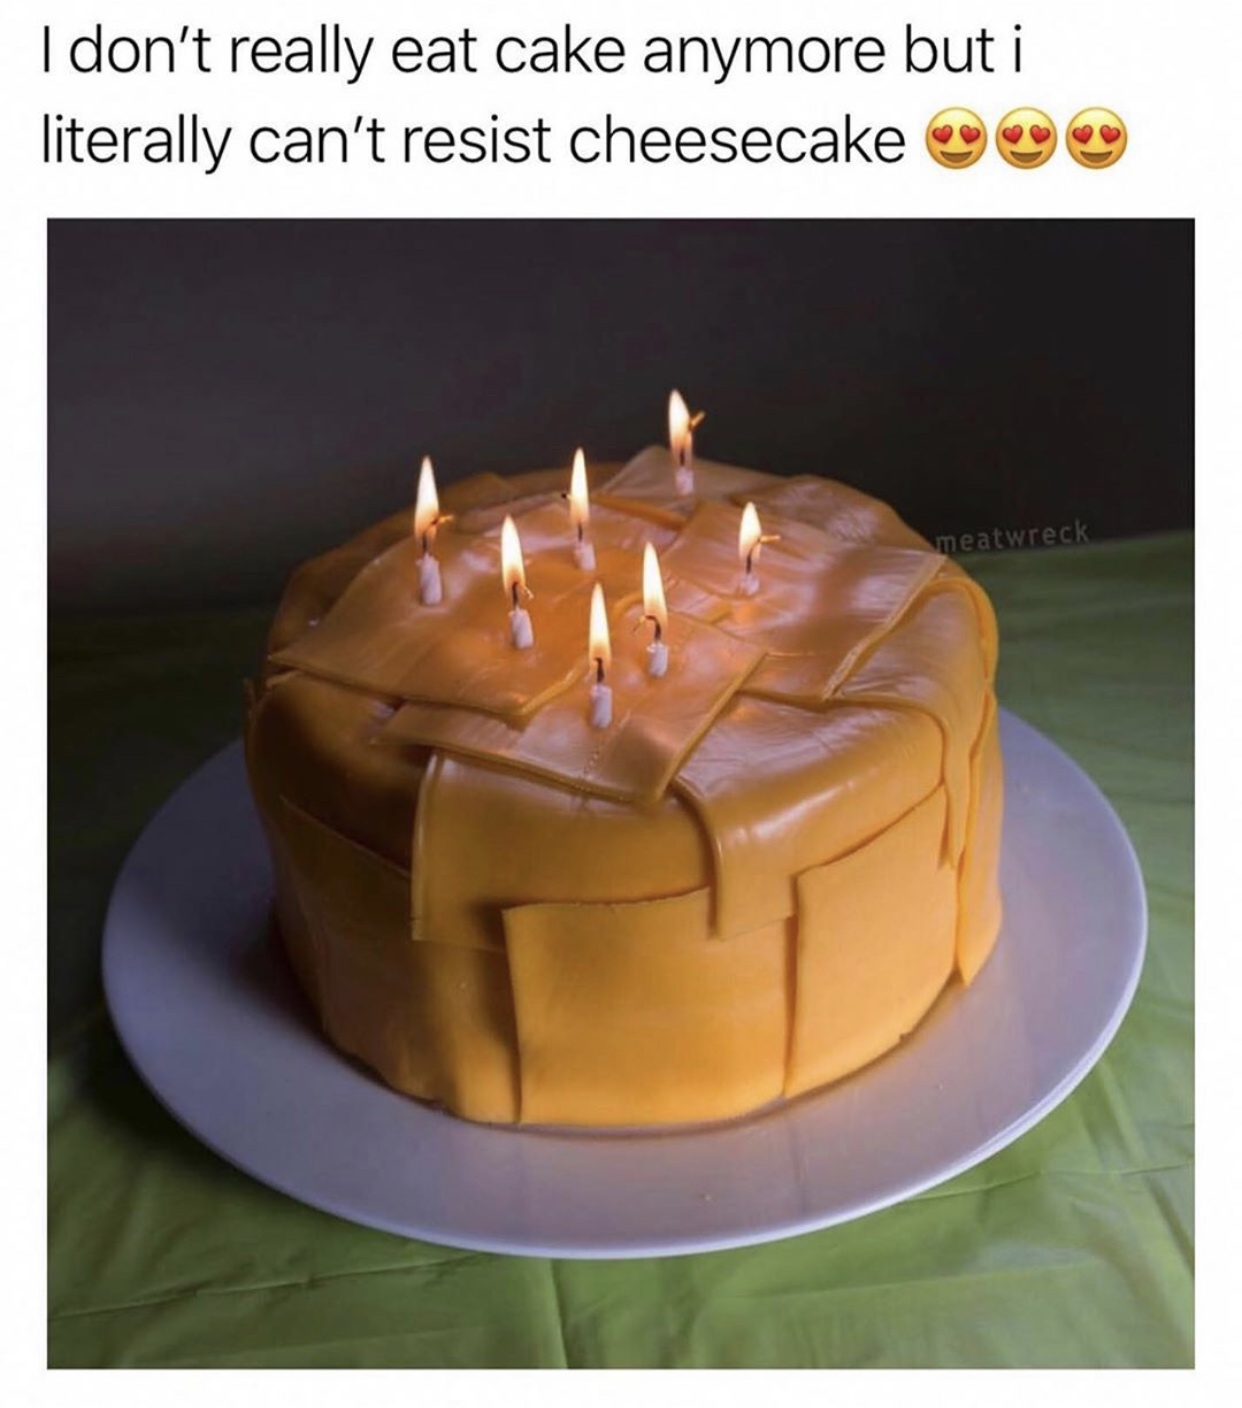 cheese cake meme - I don't really eat cake anymore but i literally can't resist cheesecake o meatwreck